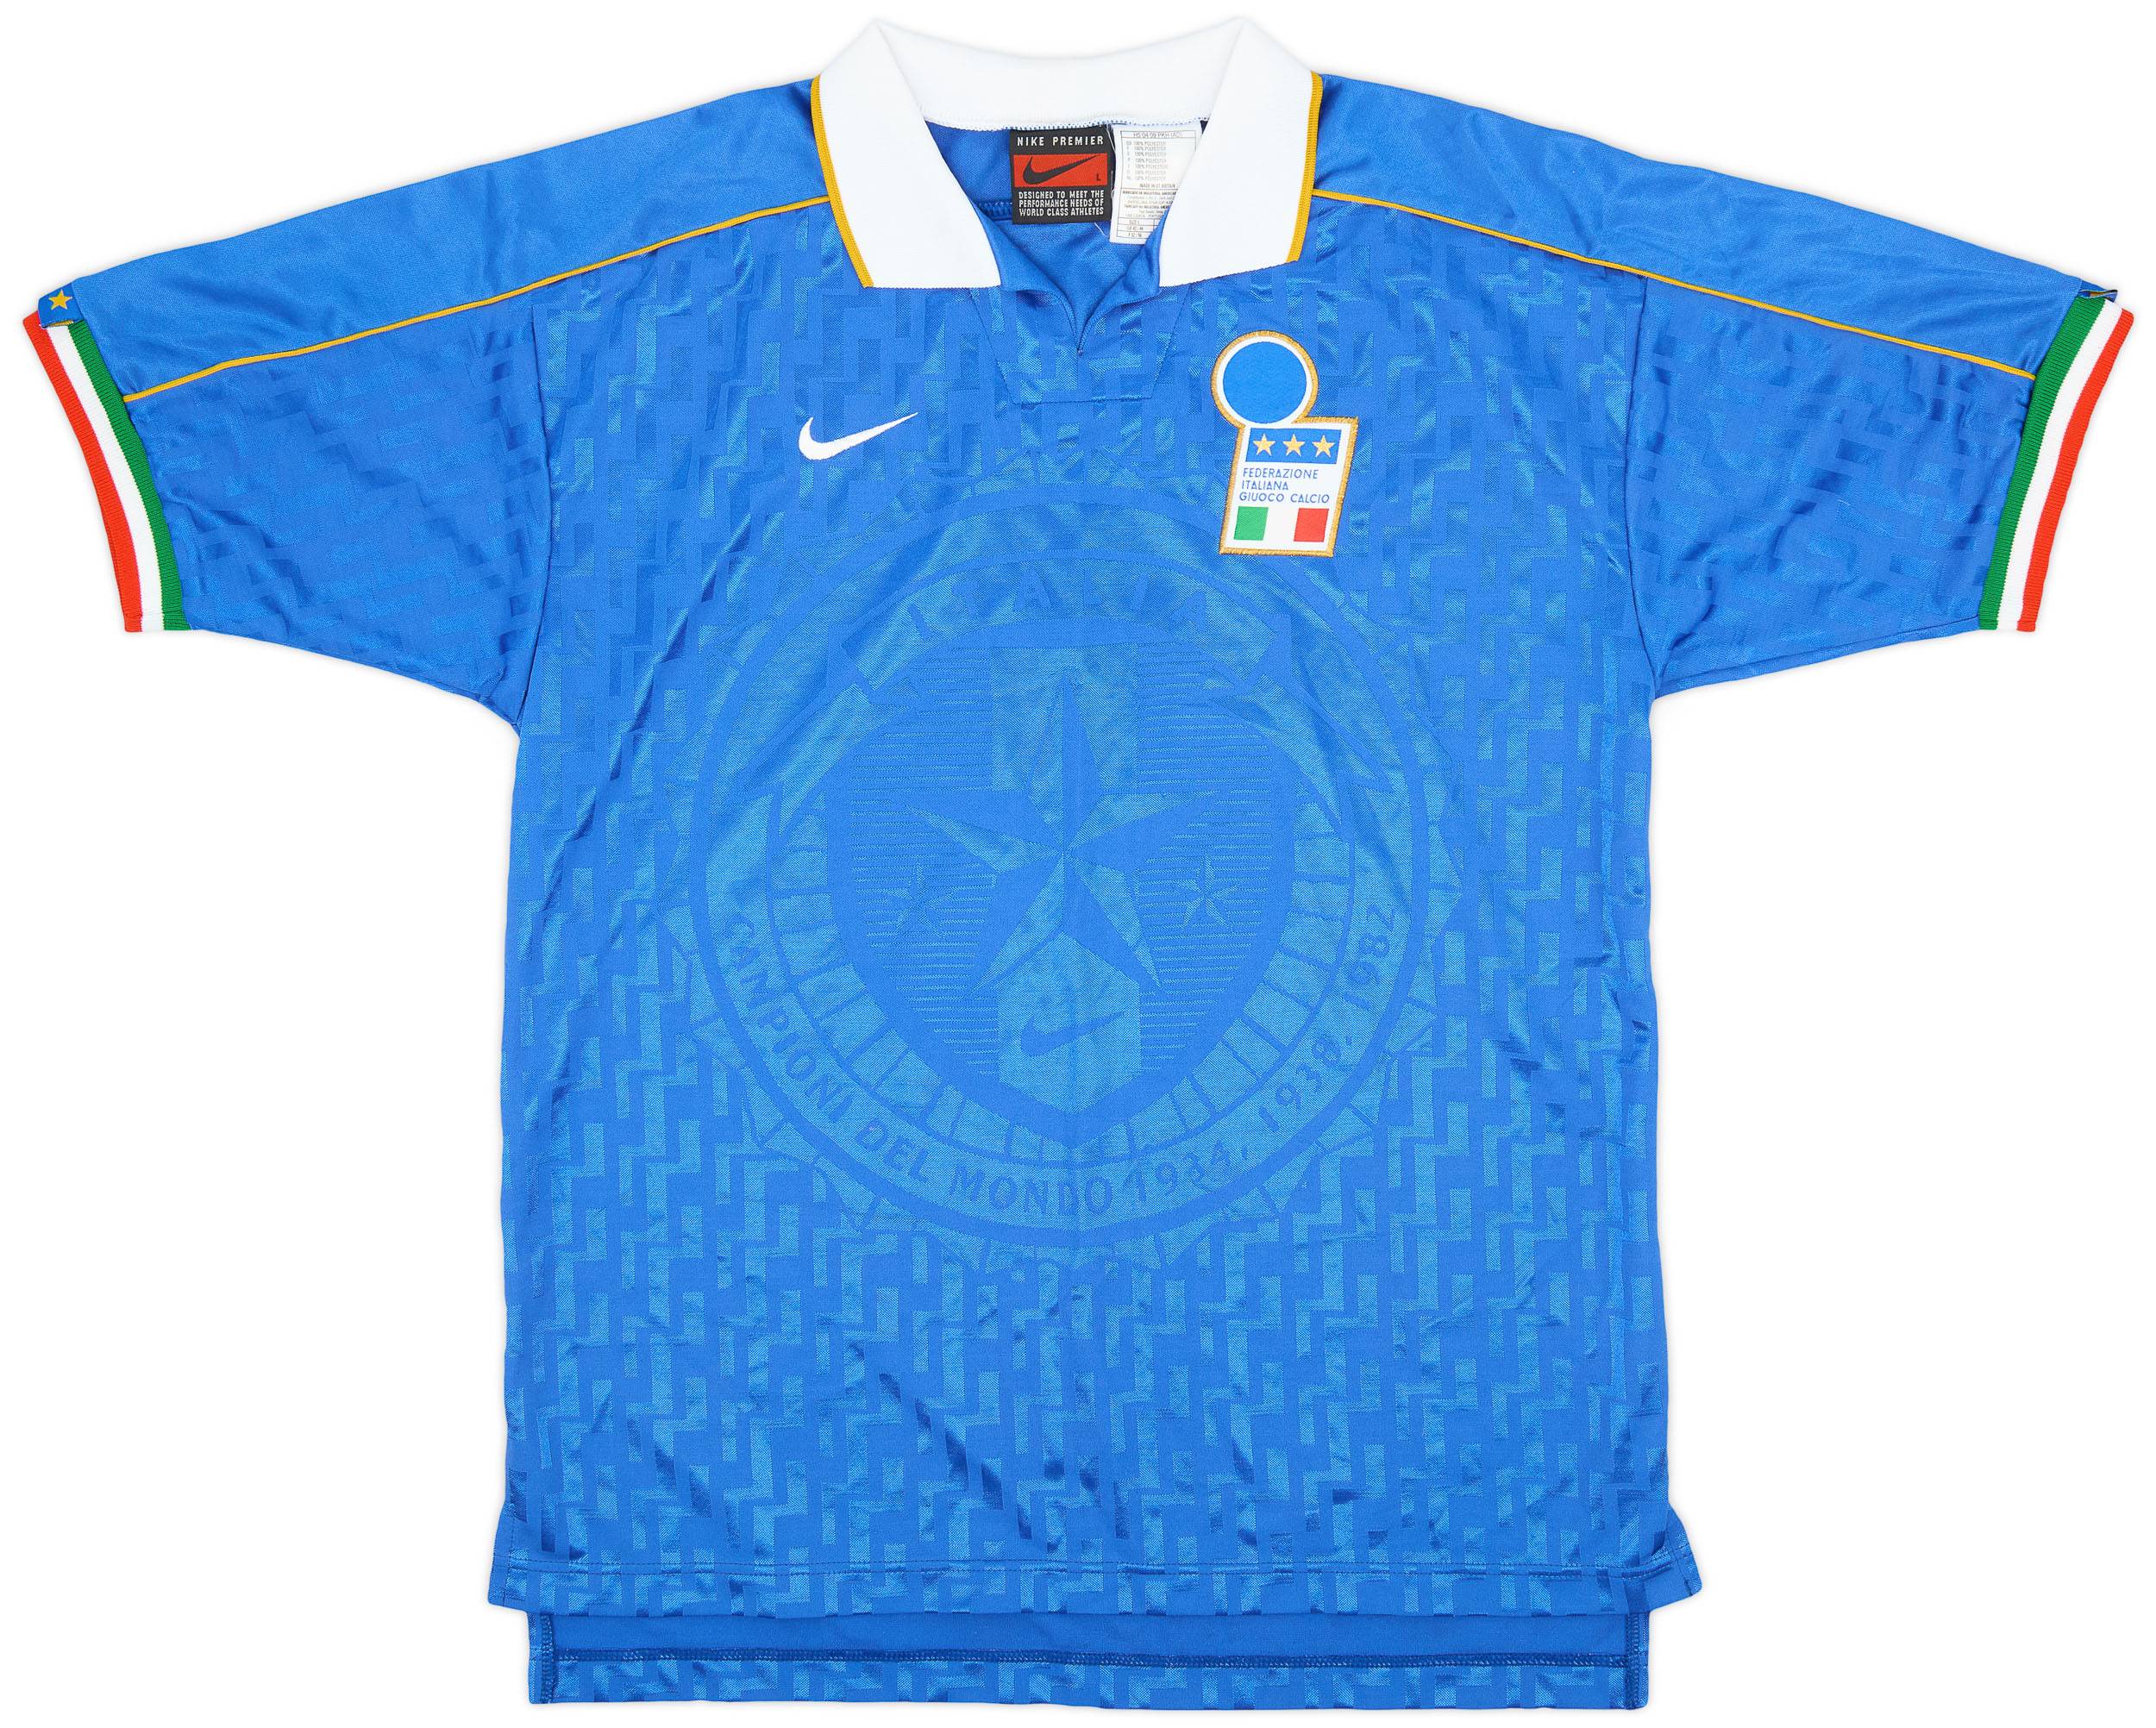 1994-96 Italy Home Shirt - 9/10 - (L)